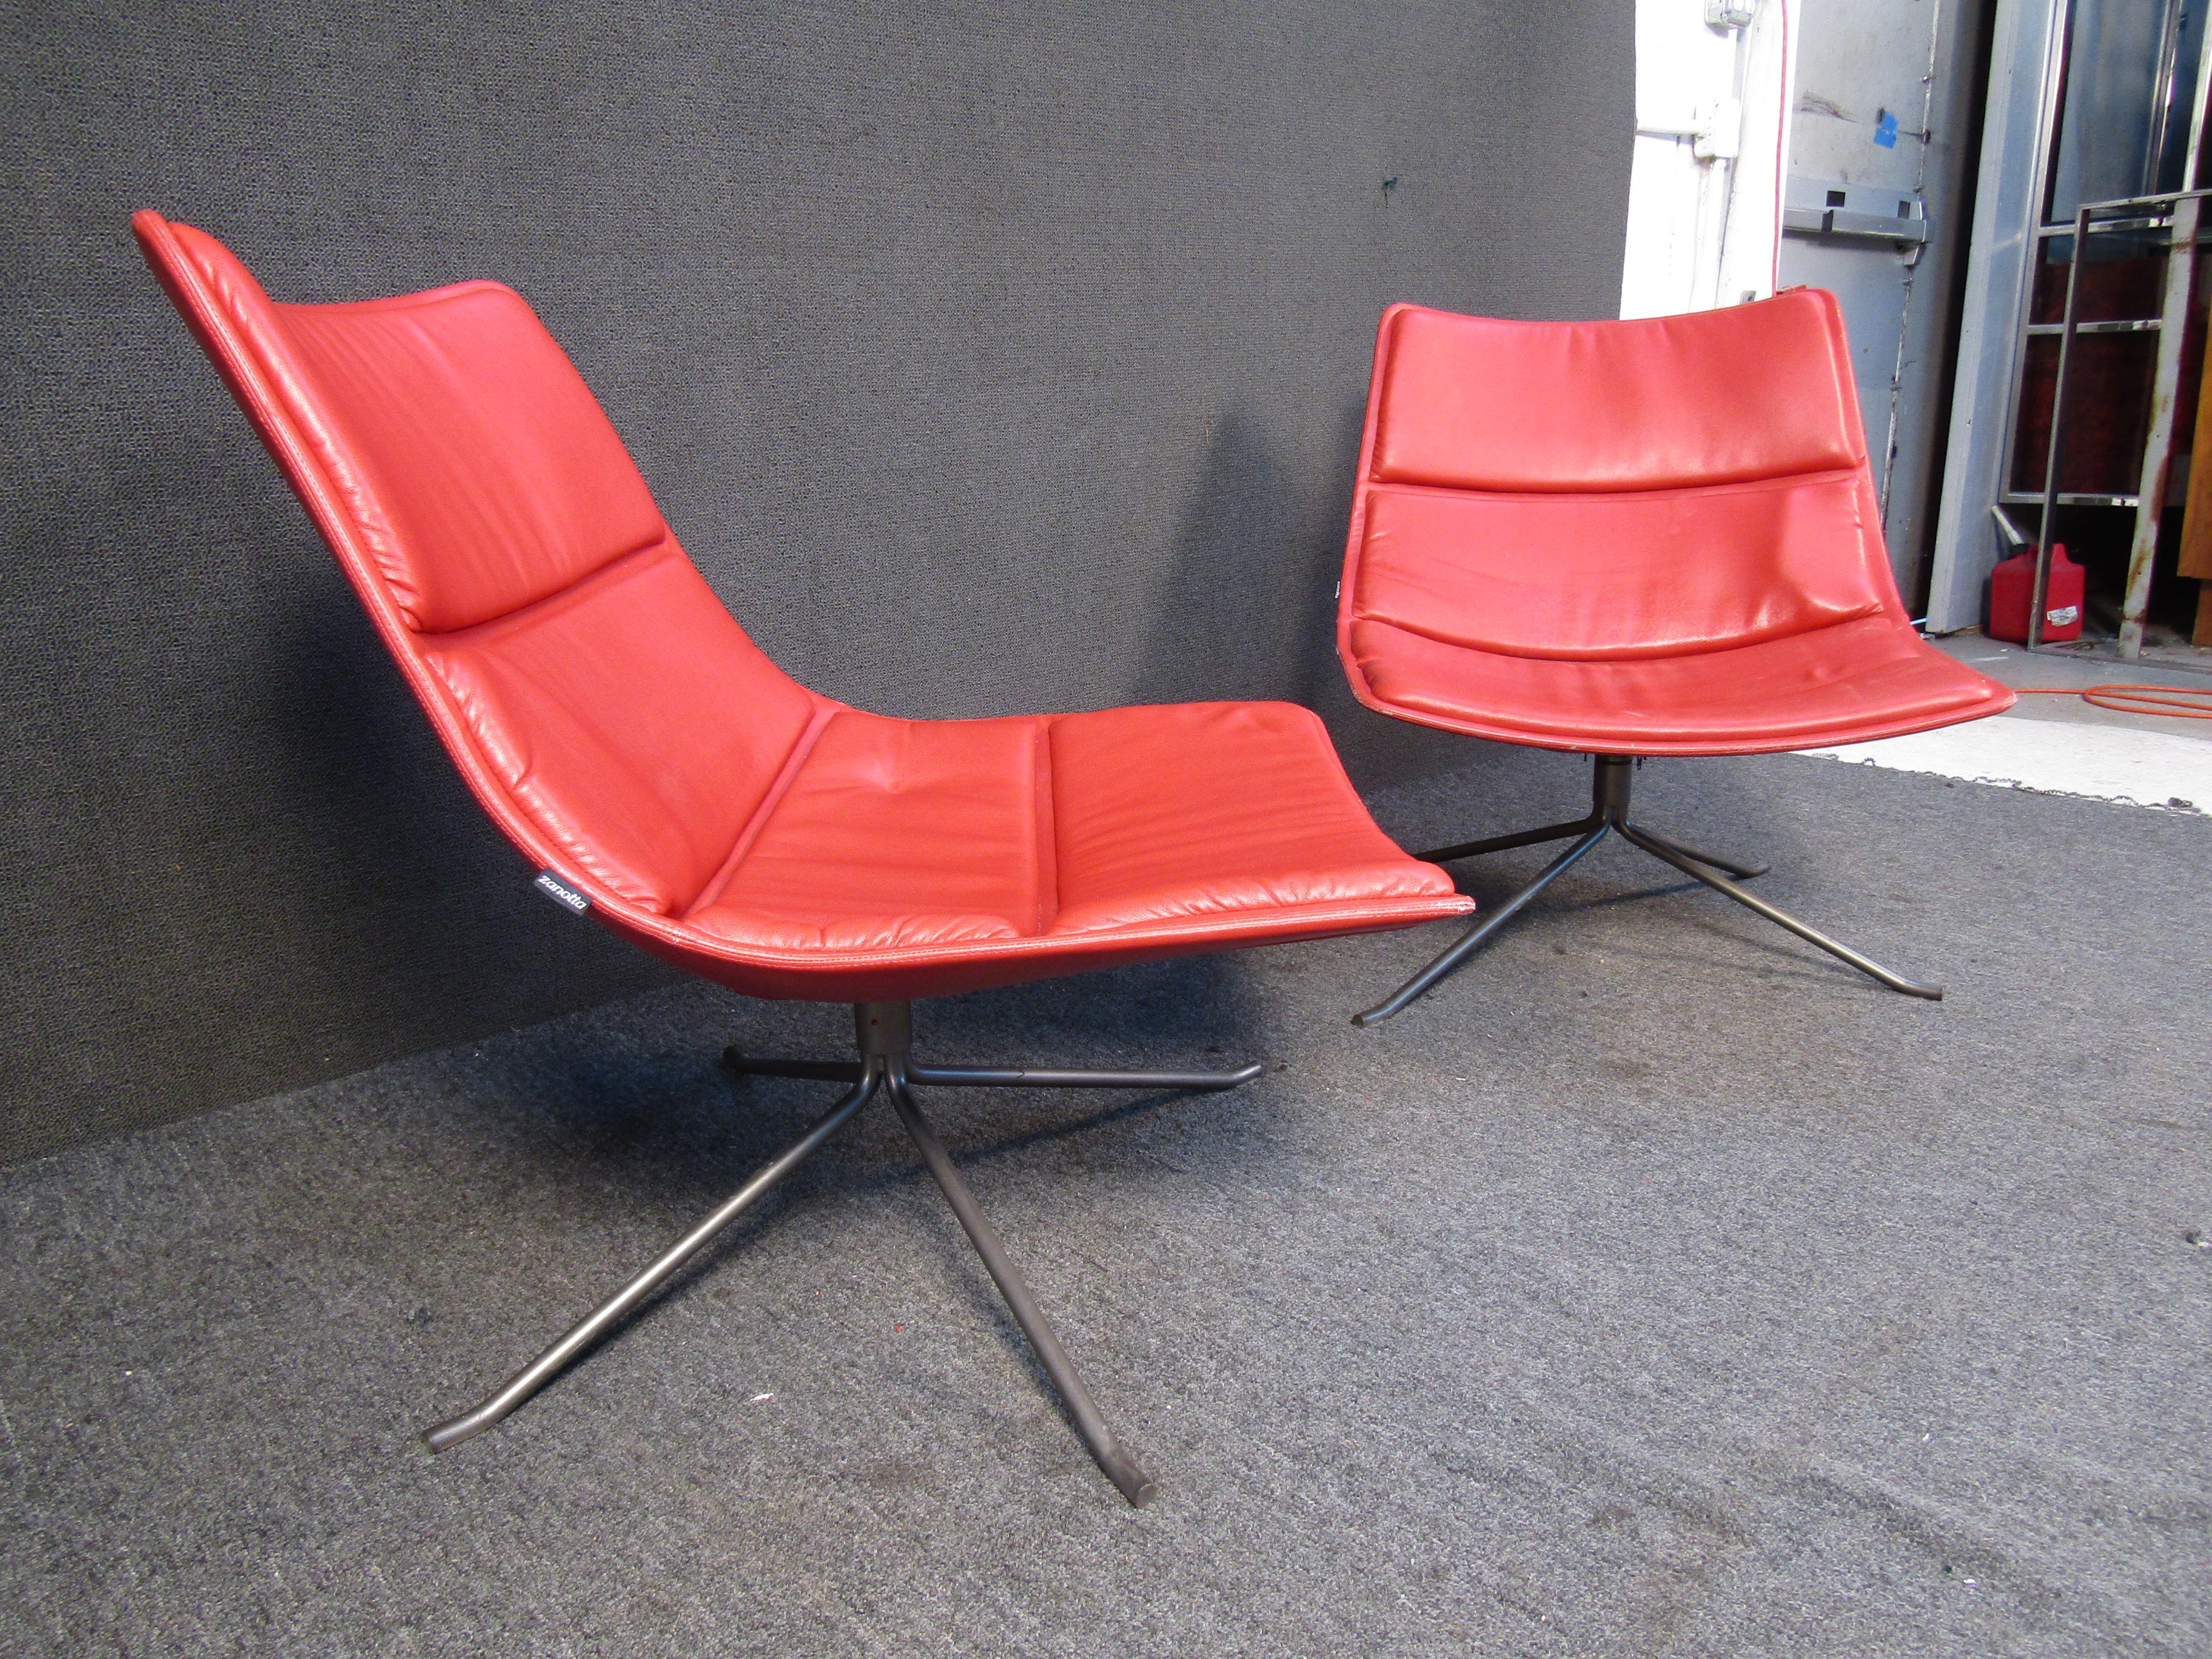 Pair of Vintage Swivel Chairs by Zanotta In Good Condition For Sale In Brooklyn, NY